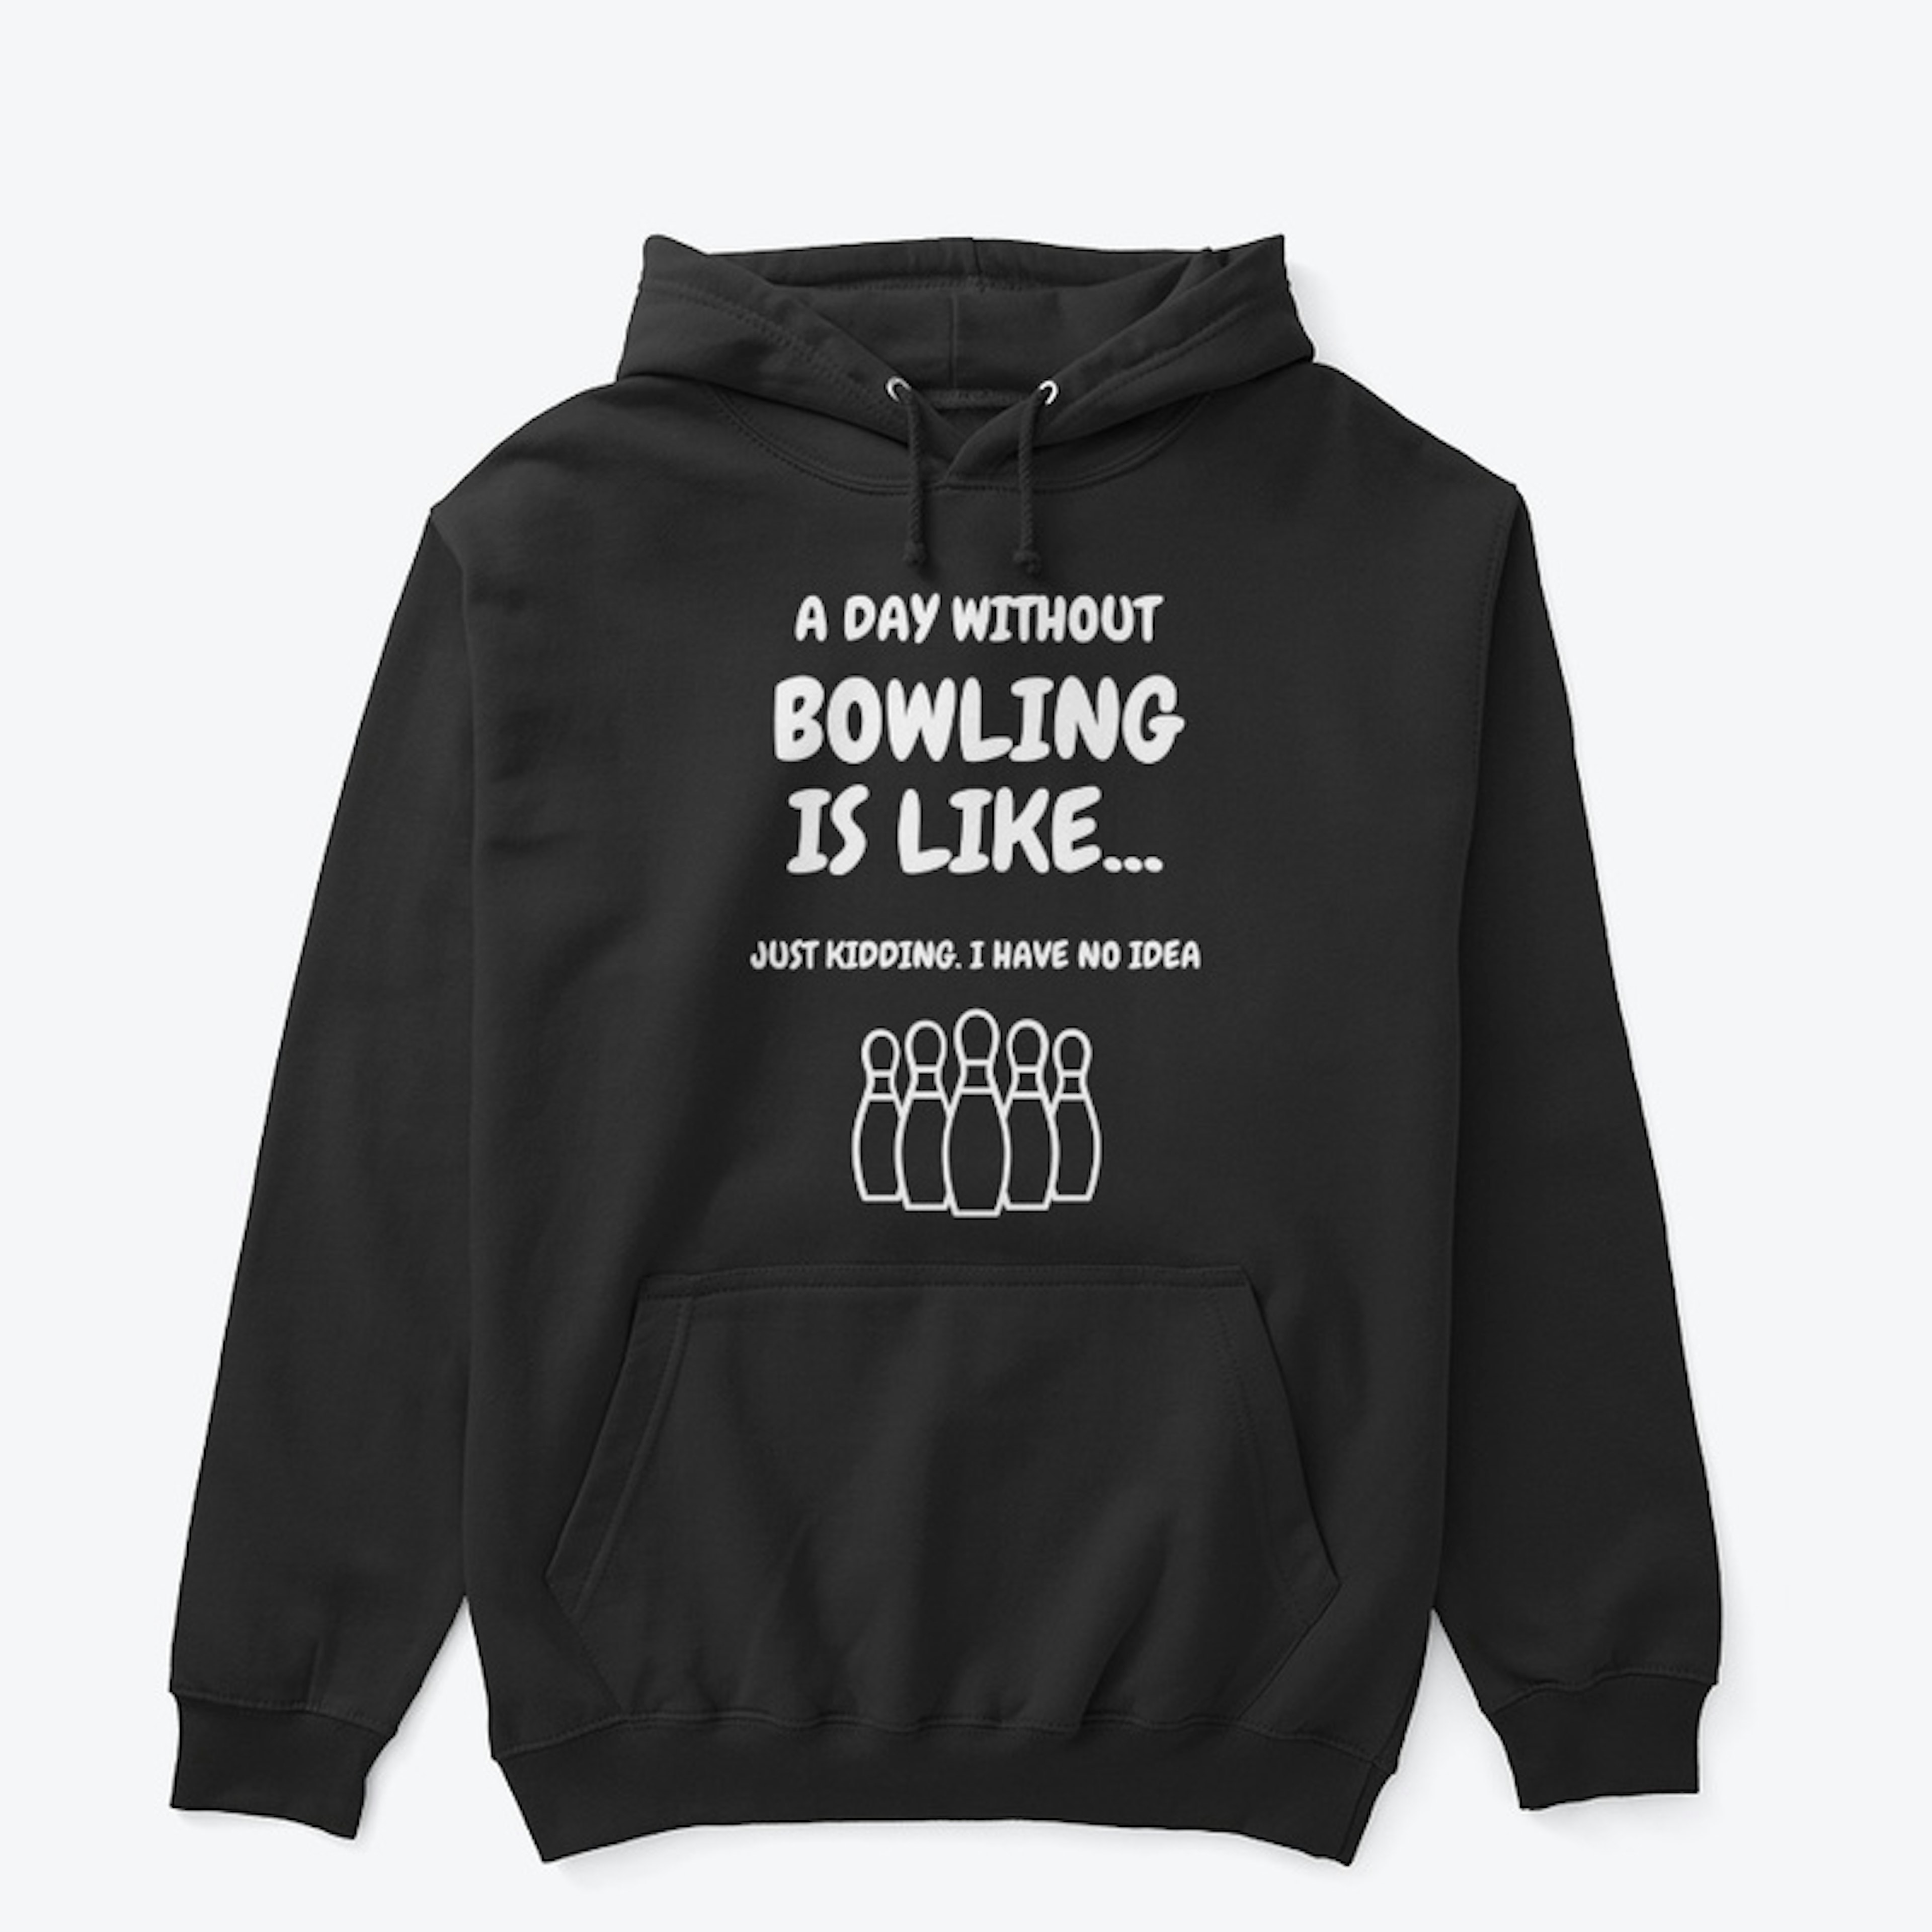 A day without bowling is like...